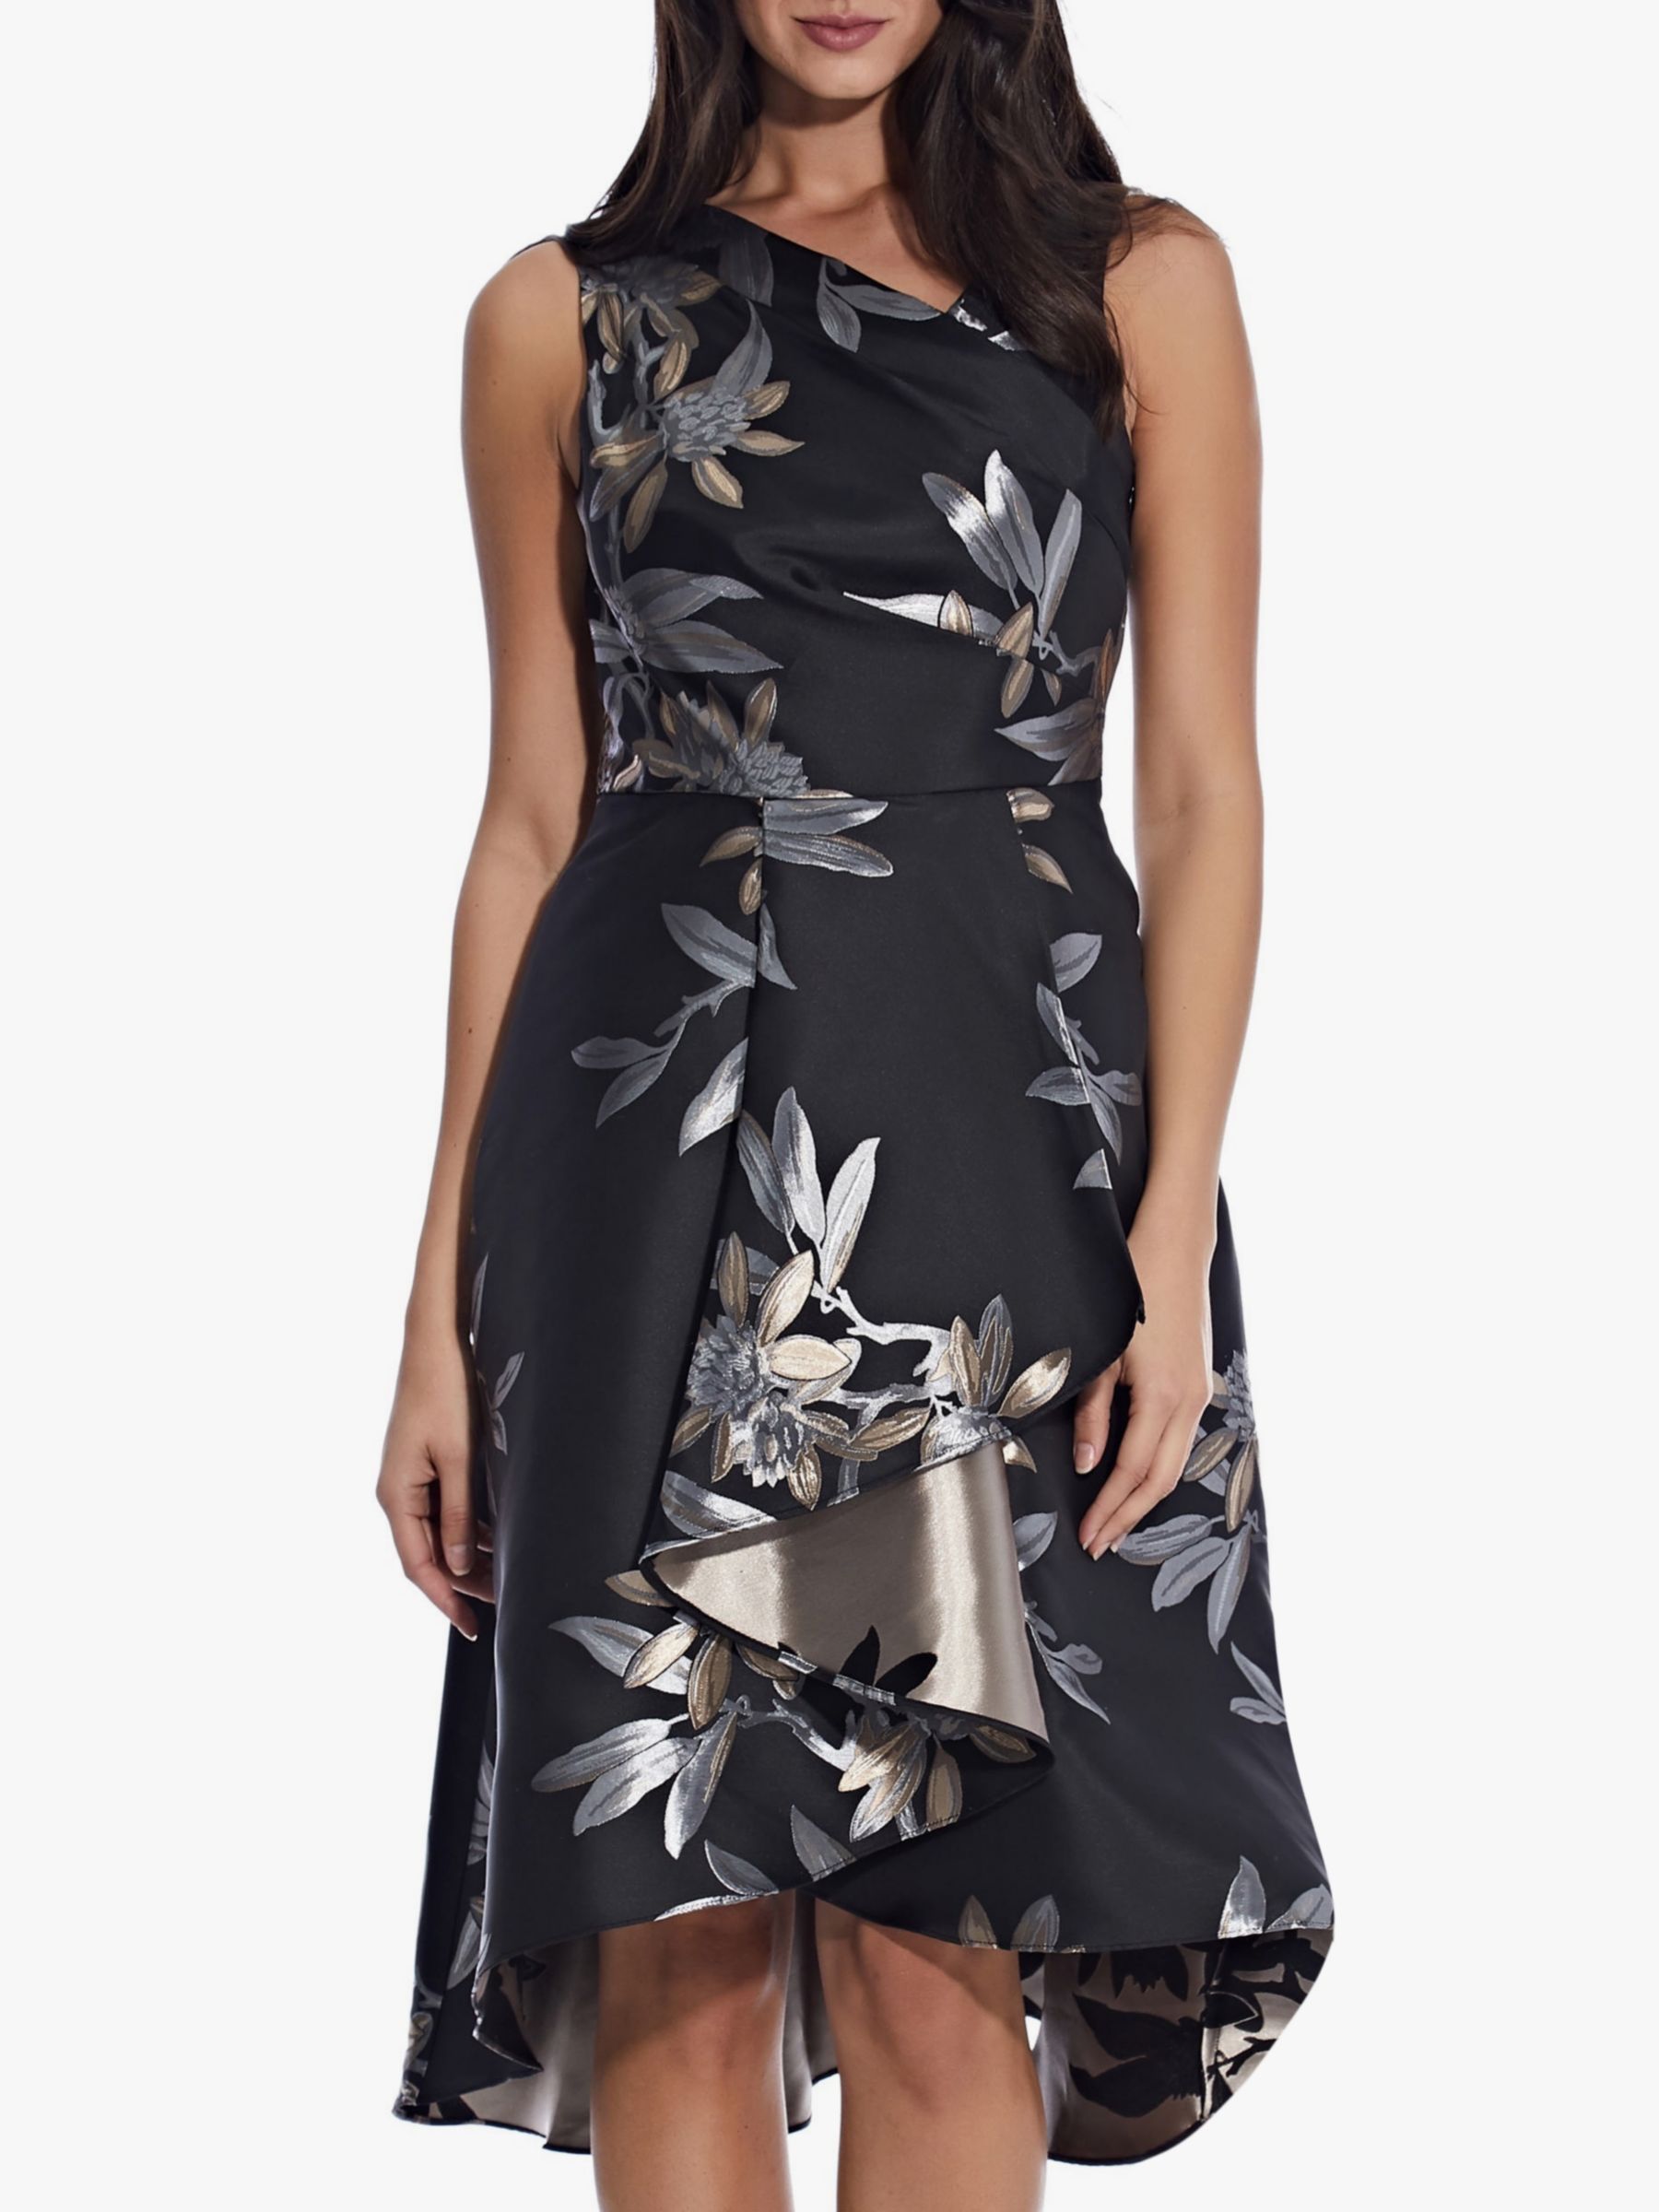 Adrianna Papell Floral Jacquard Dress ...